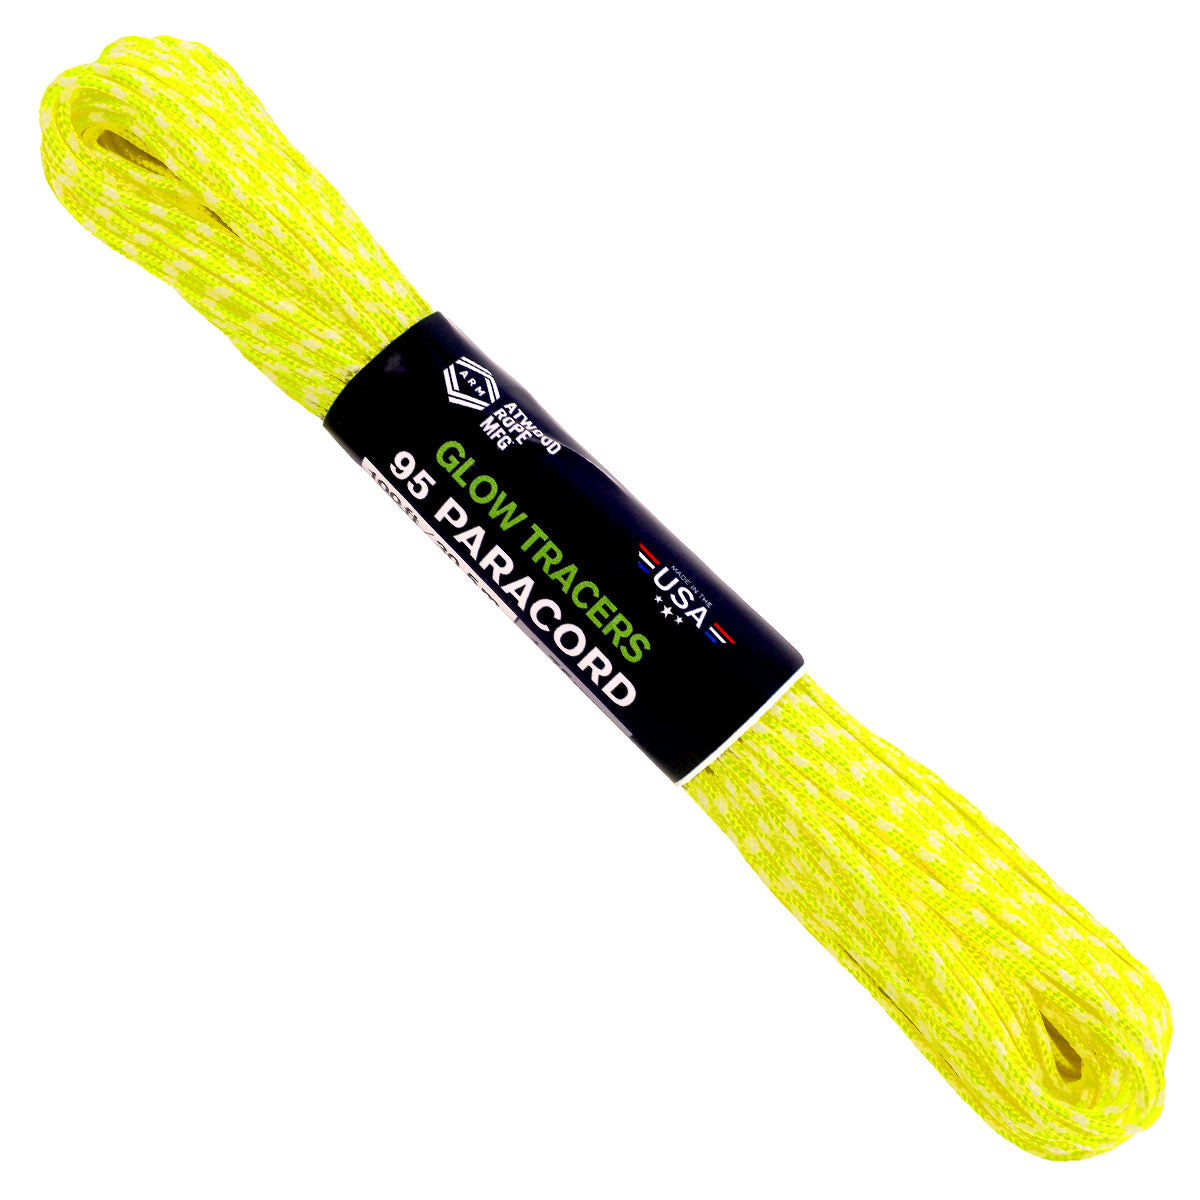 Neon Orange 550 Paracord with Reflective Tracers